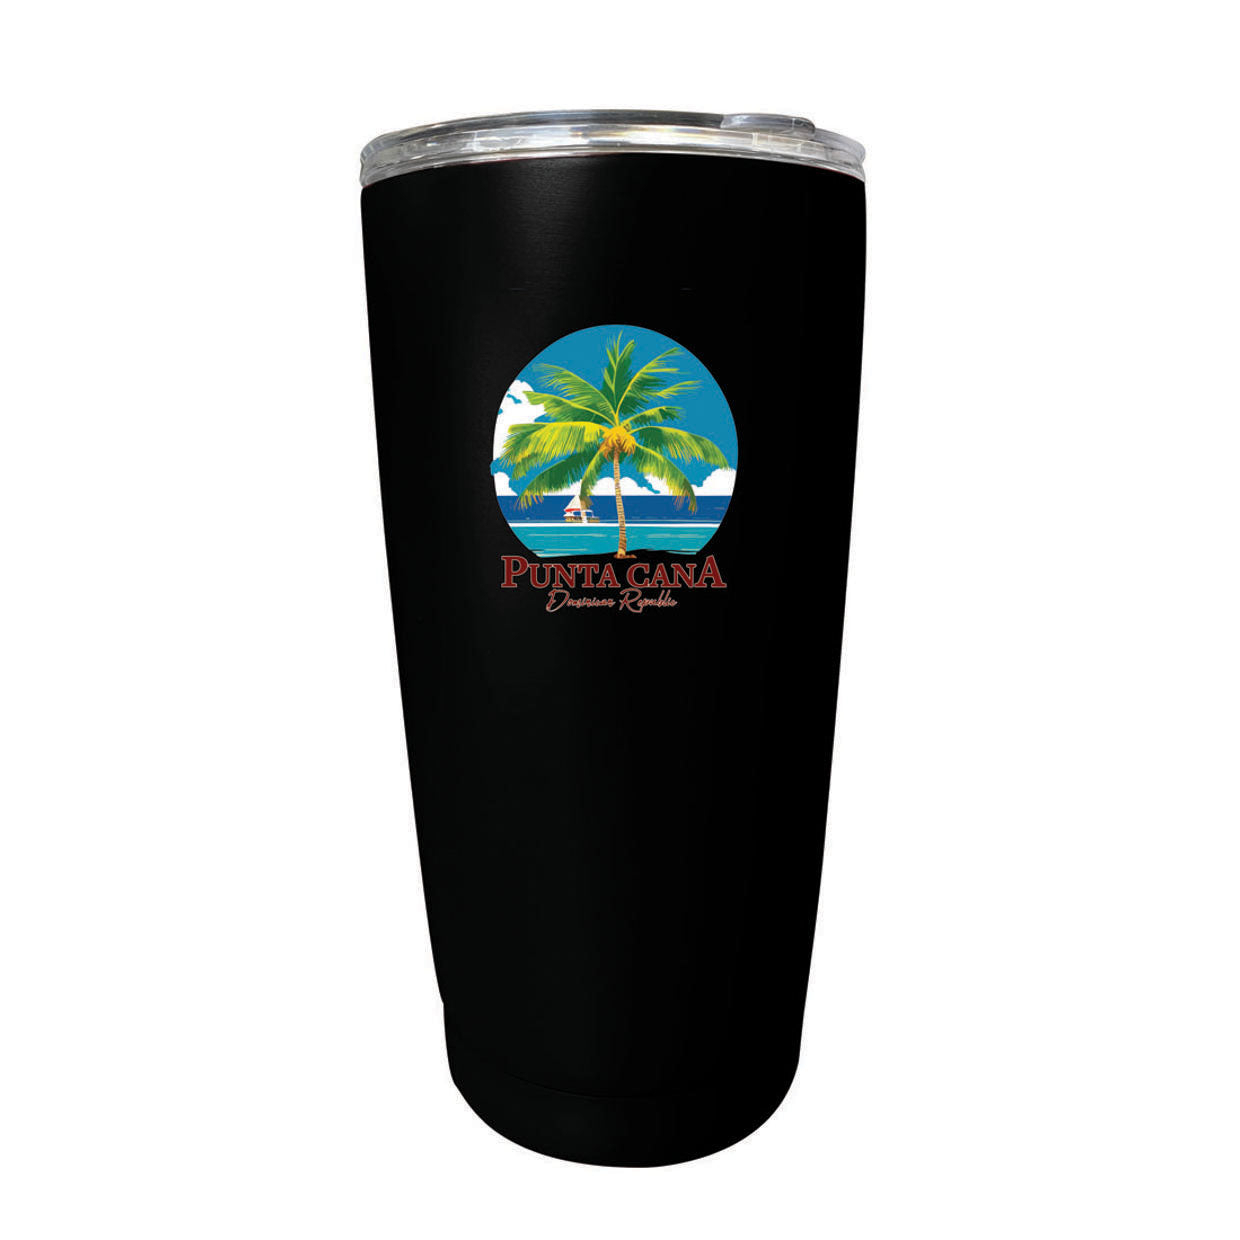 Punta Cana Dominican Republic Souvenir 16 Oz Stainless Steel Insulated Tumbler - Green, PARROT B